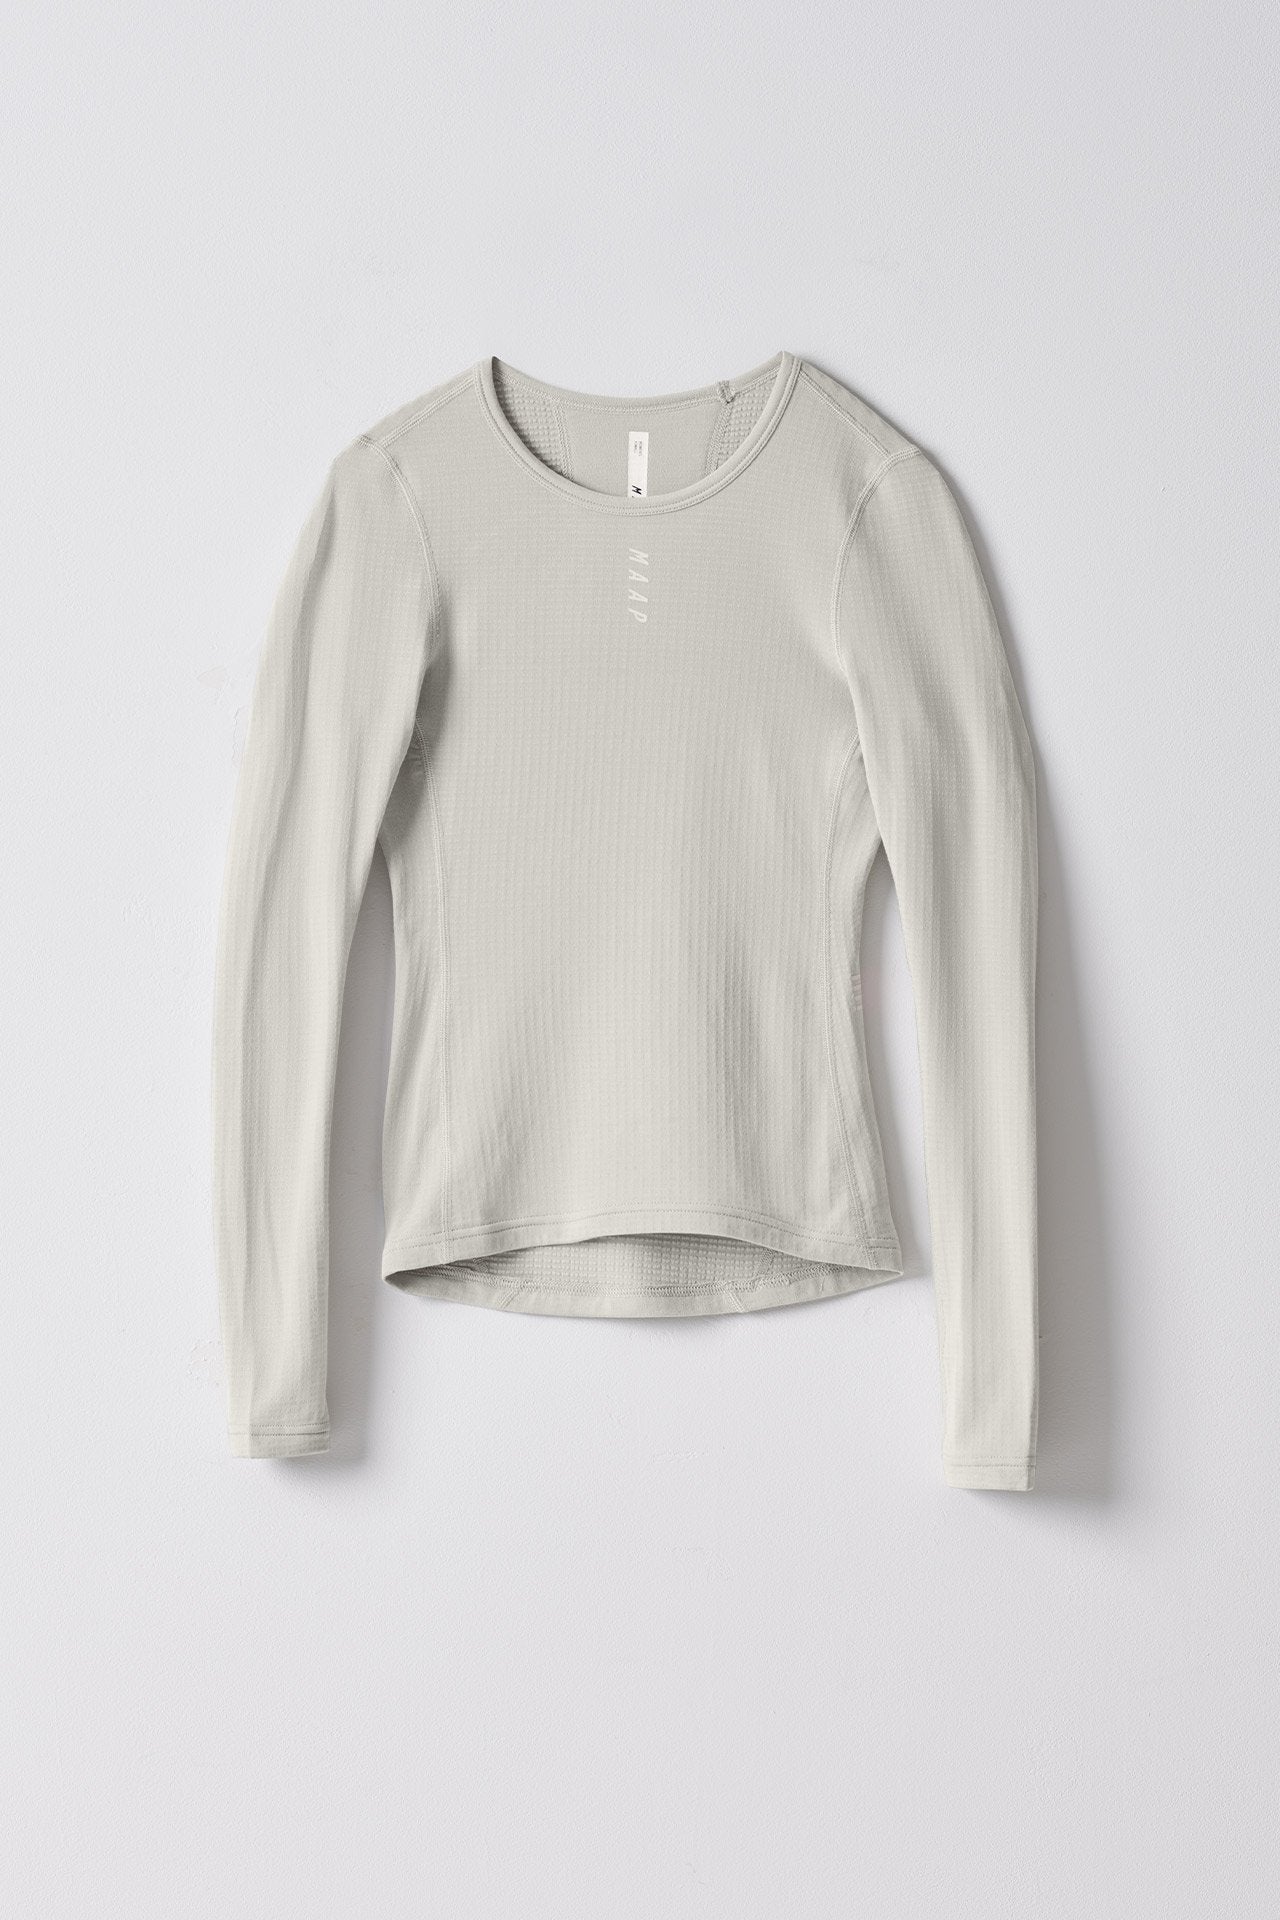 Women's Thermal Base Layer LS Tee